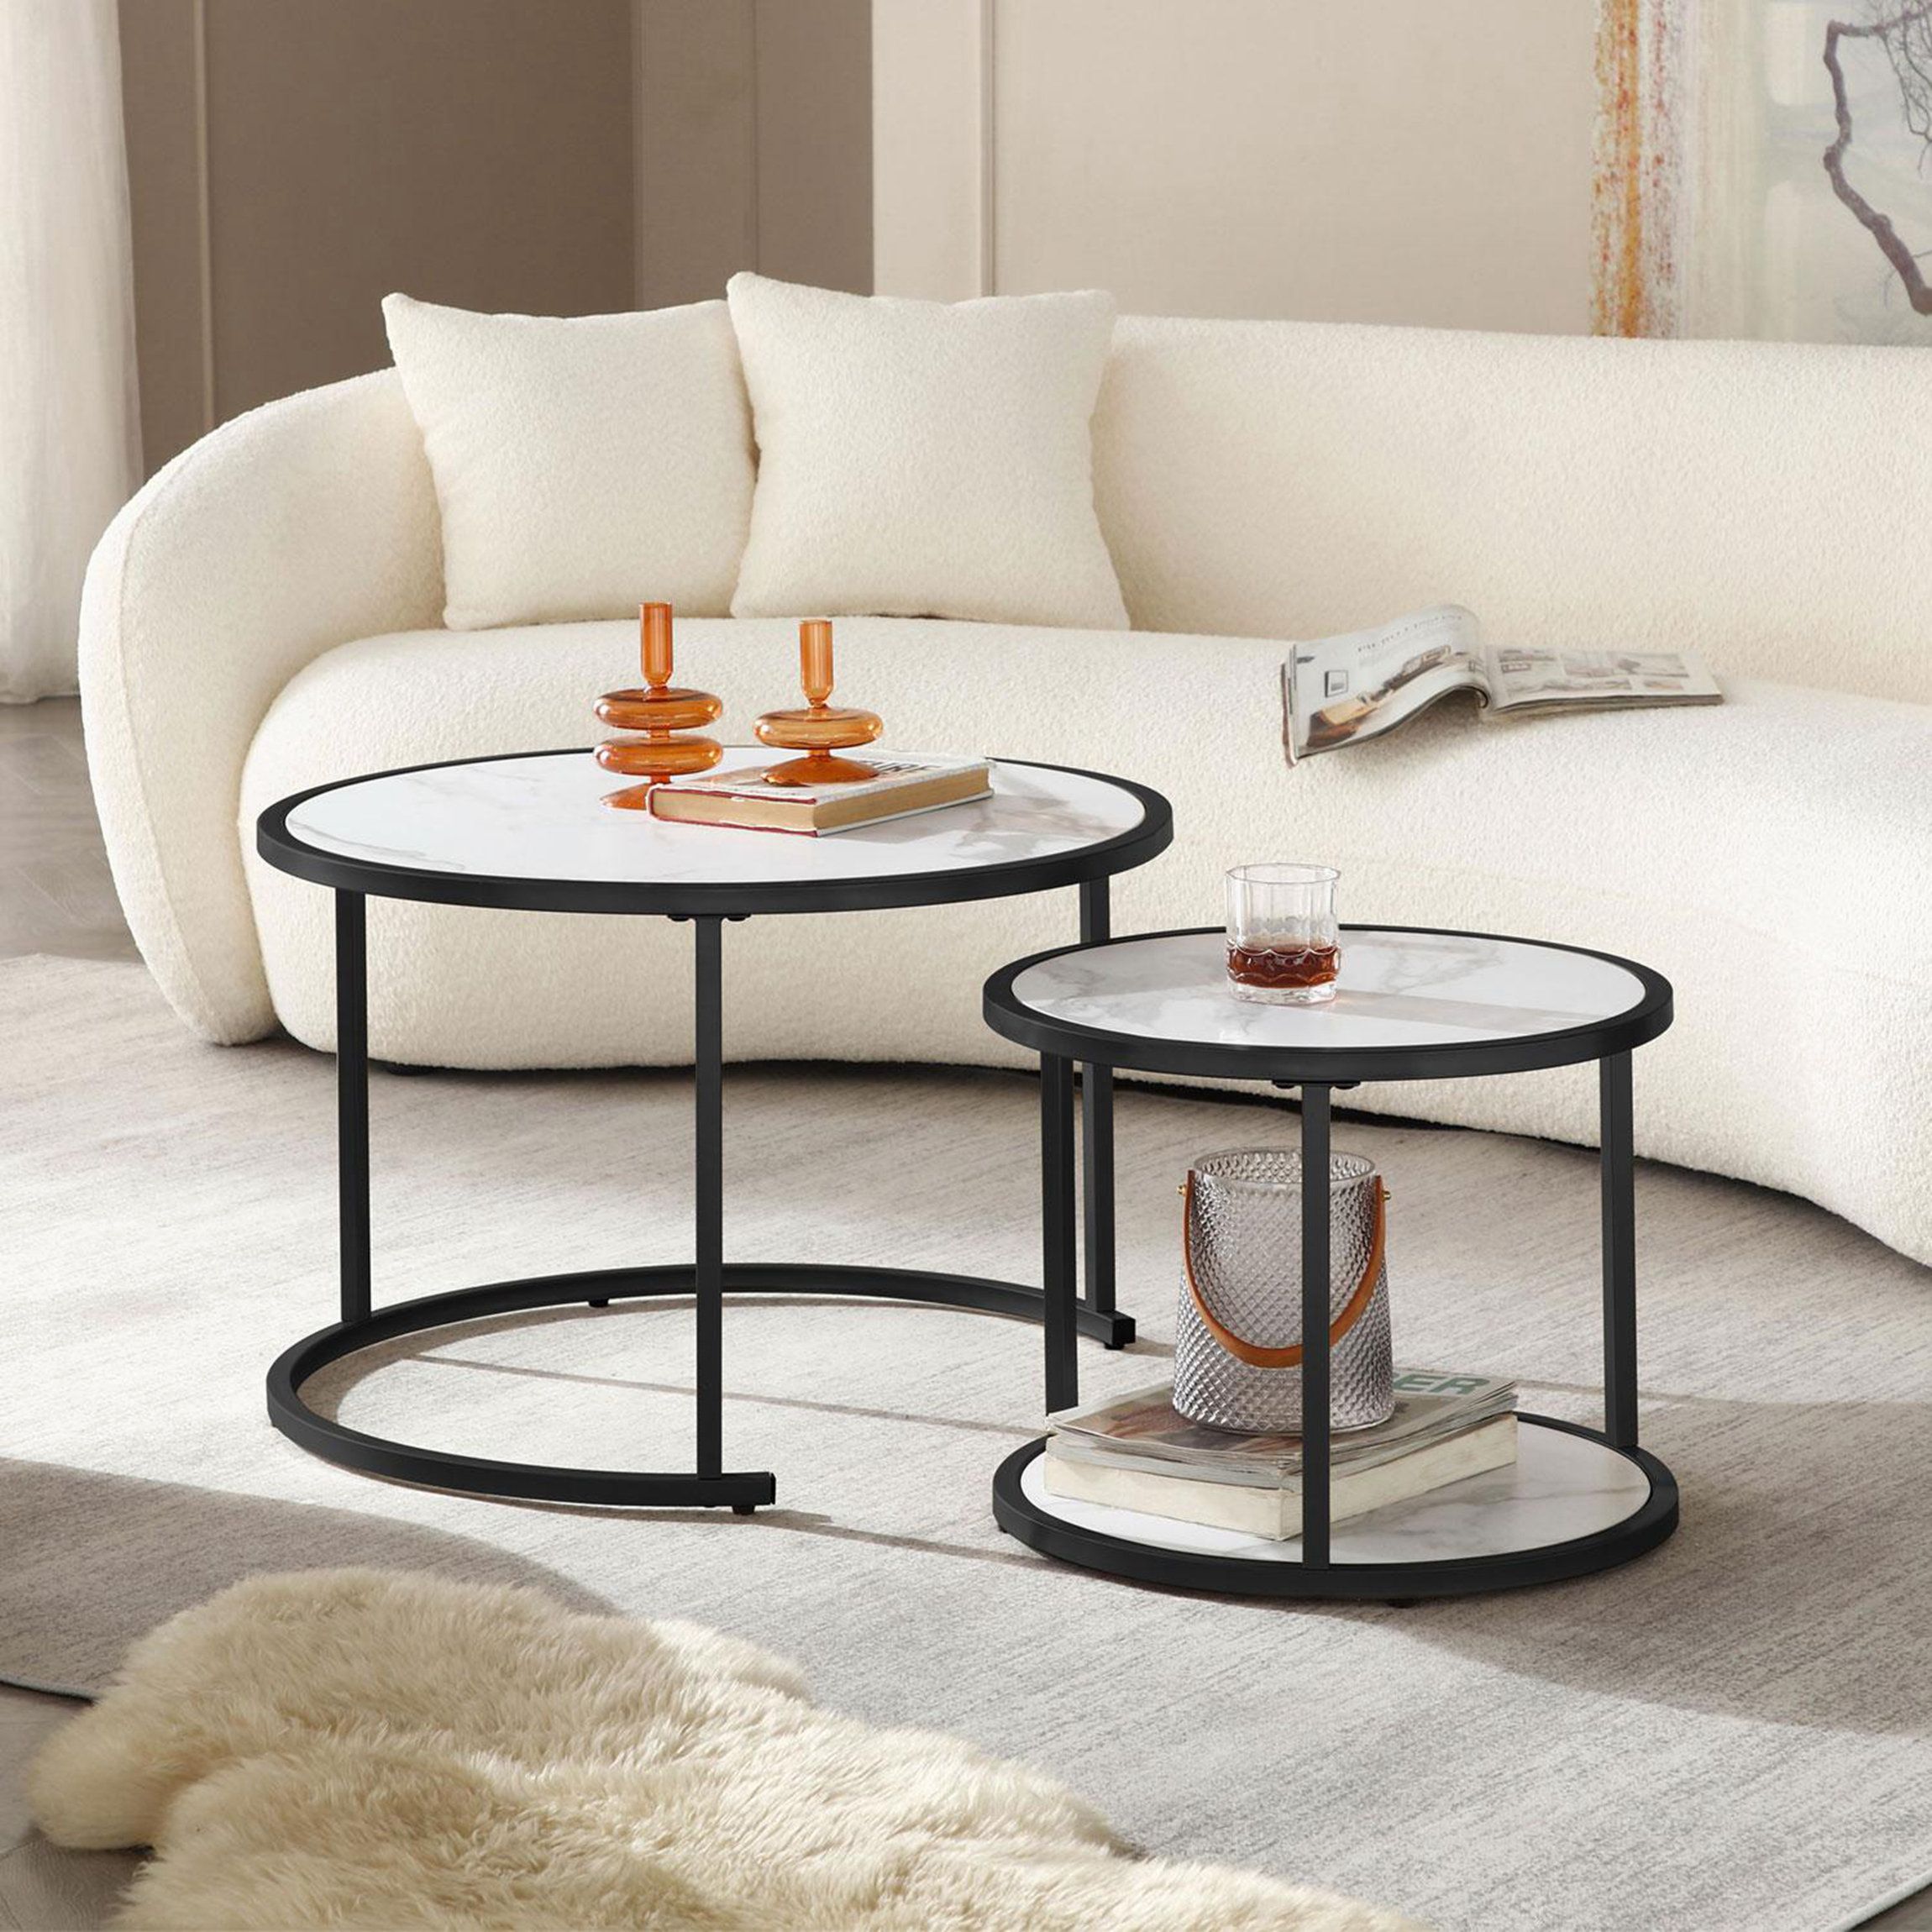 Mercer41 Lazarria Nesting Coffee Table | Wayfair Pertaining To Nesting Coffee Tables (View 8 of 15)